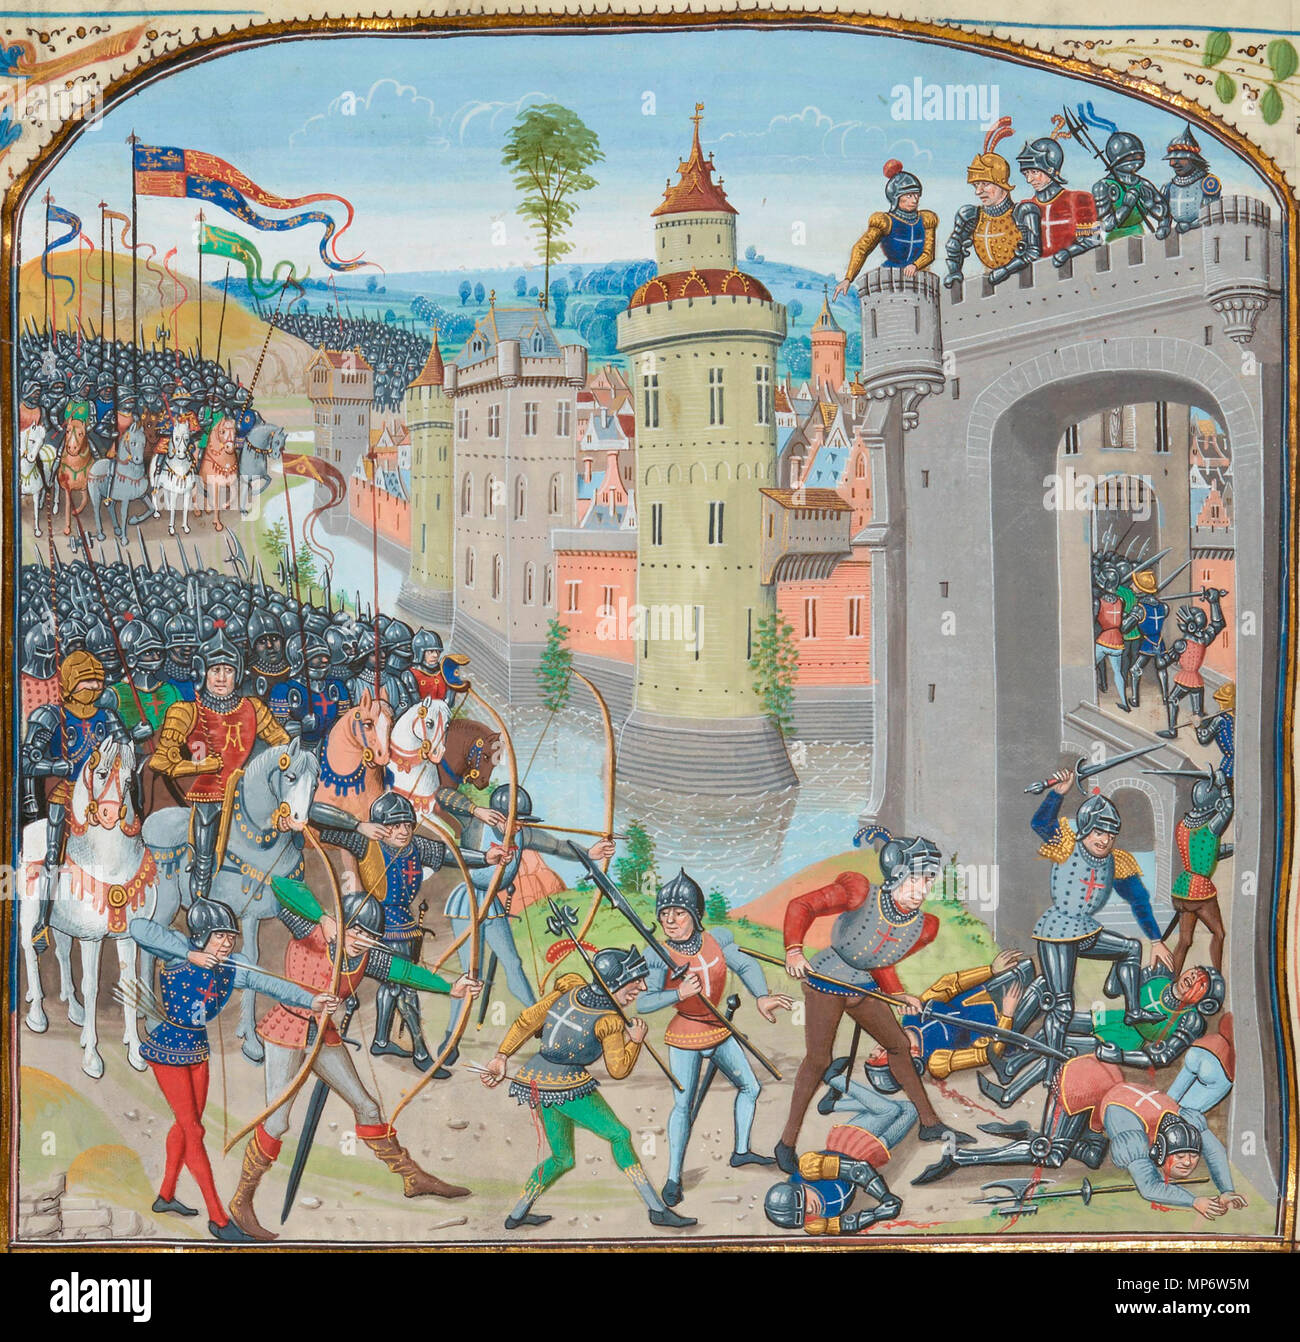 . Prise de Caen en 1346 . 15th century.   Jean Froissart  (1337–1410)       Alternative names Jean Froissart. A chronicler of medieval France who wrote 'Froissart's Chronicles' which is an important source of information for the first half of the Hundred Years' War.  Description French chronicler, historian, canon, poet and writer  Date of birth/death 1330s 1405  Location of birth/death Valenciennes Chimay  Authority control  : Q315000 VIAF: 100178580 ISNI: 0000 0001 1821 9033 LCCN: n50023448 NLA: 35105465 GND: 118536370 WorldCat 1029 Prise caen 1346 Stock Photo